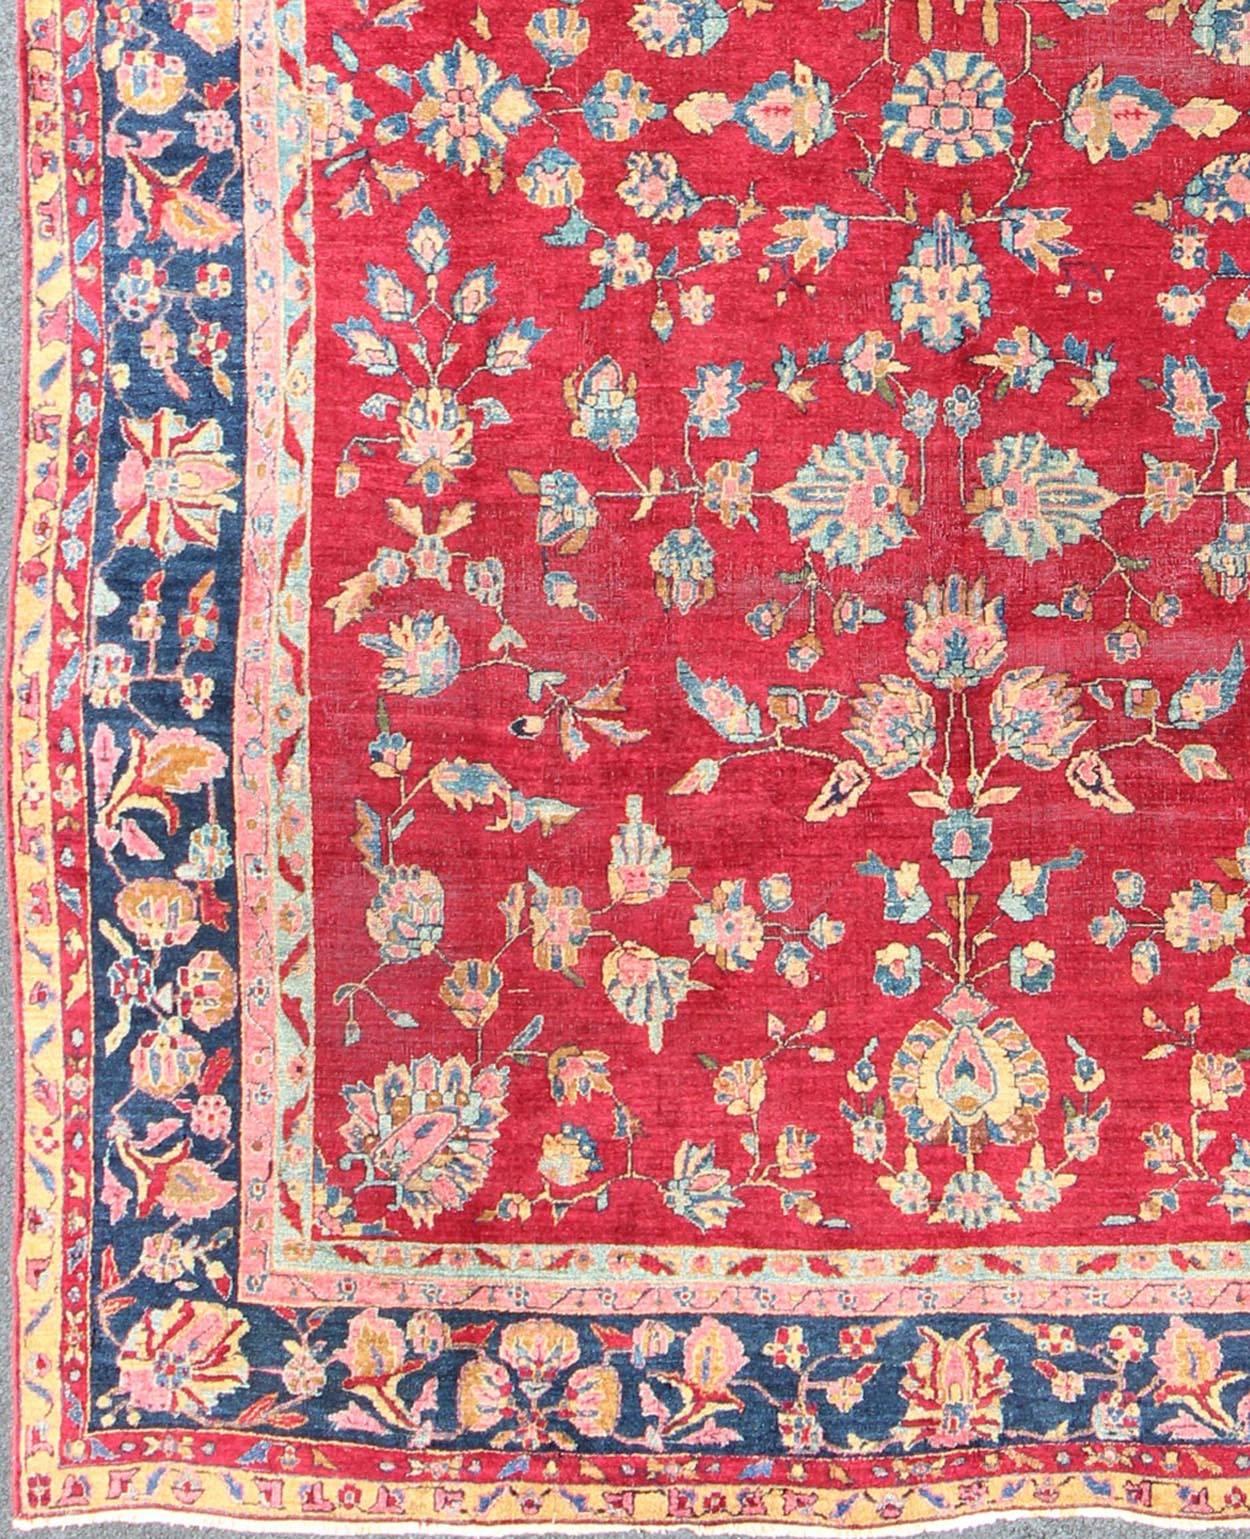 All-over floral design antique Indian Amritsar rug in red and blue tones, Keivan Woven Arts / rug B-0103, country of origin / type: Indian / Sarouk, circa 1910.

Measures: 8'10 x 12'2

This immaculately woven early 20th century Amritsar rug